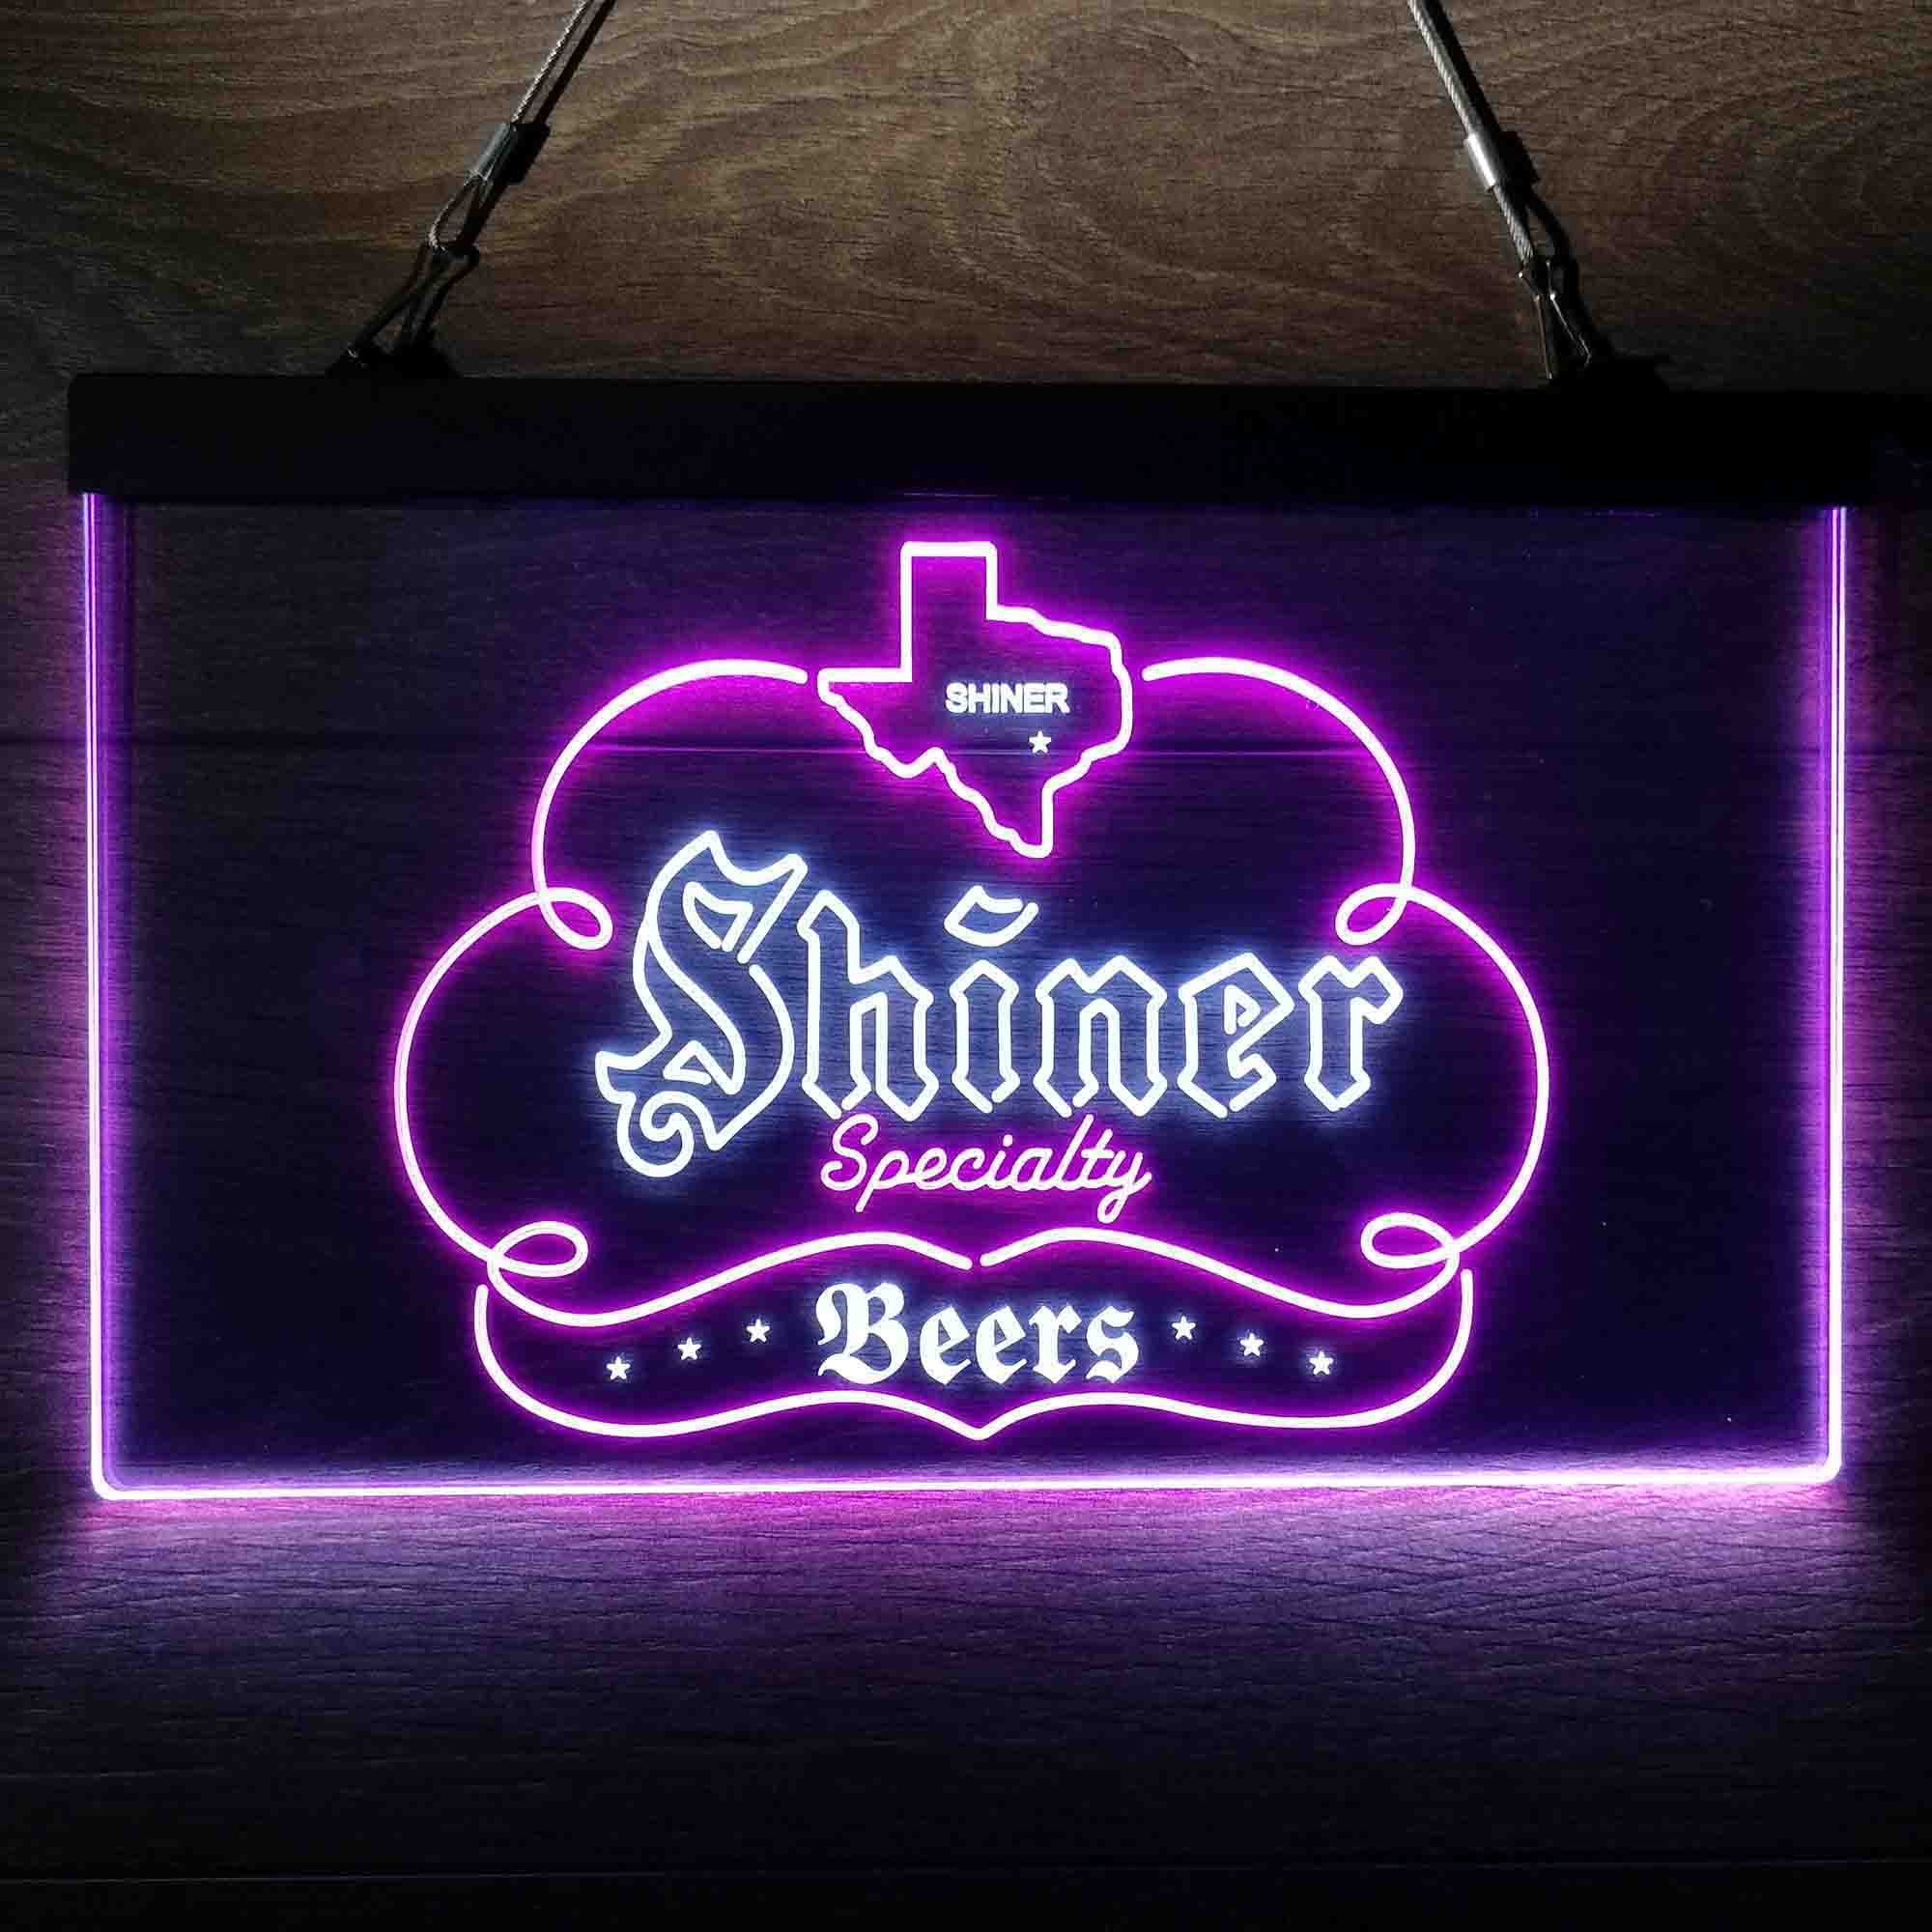 Shiner Texas Beer Brewery  Neon-Like LED Sign